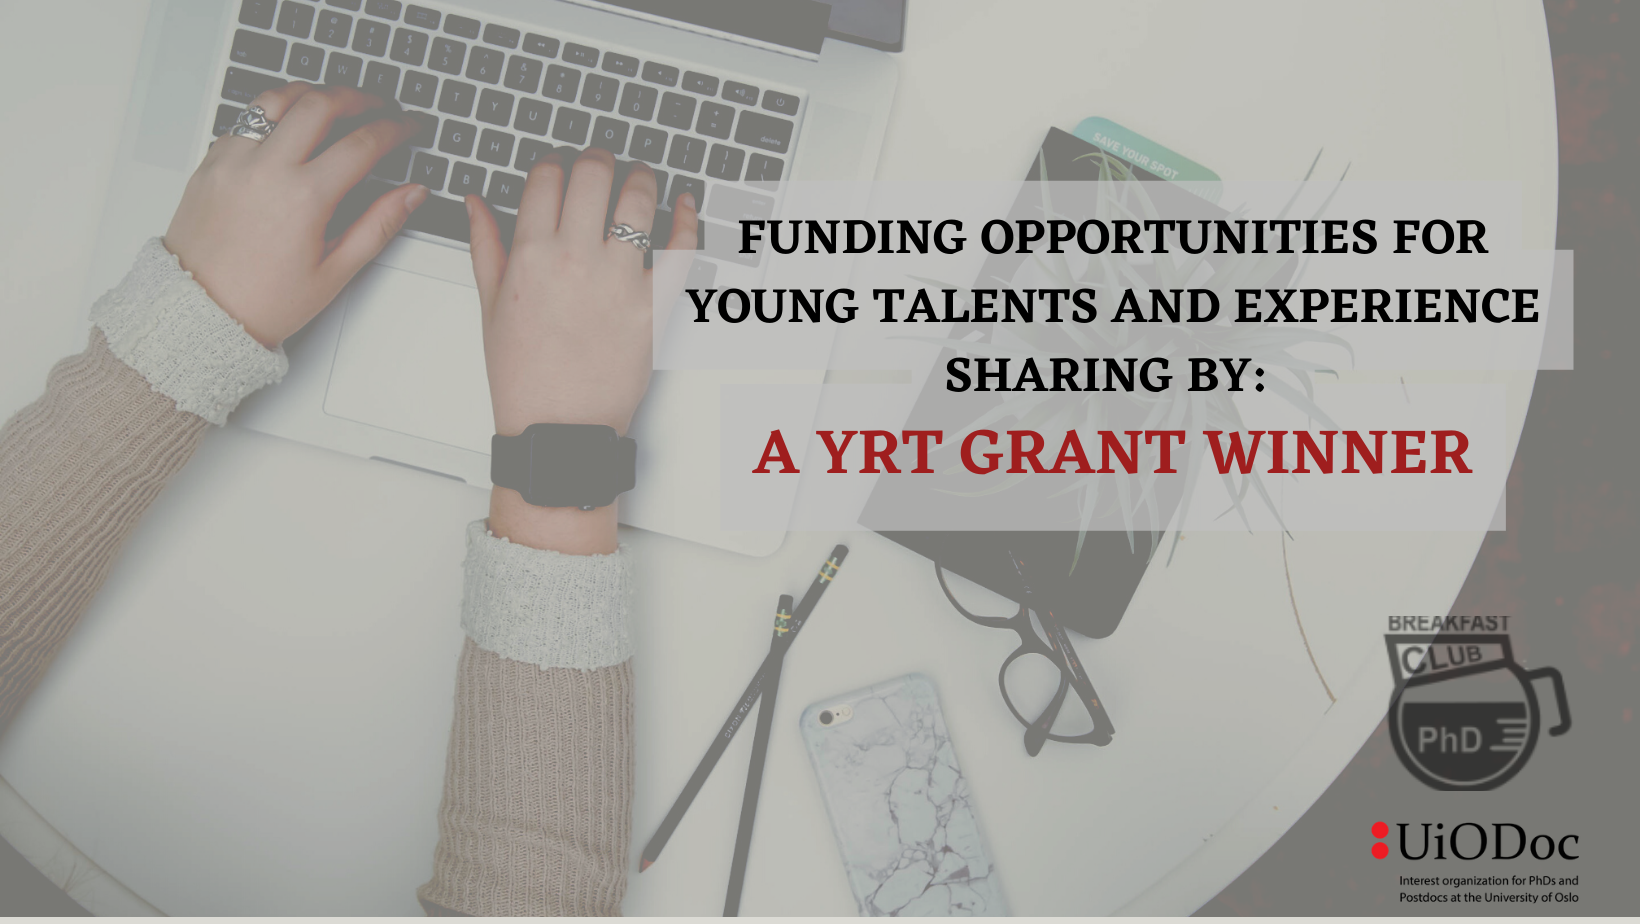 poster with the UiODoc logo and the title of the event ' funding opportunities for young talents and experience sharing by: A YRT GRANT WINNER' over a background of typing hands.